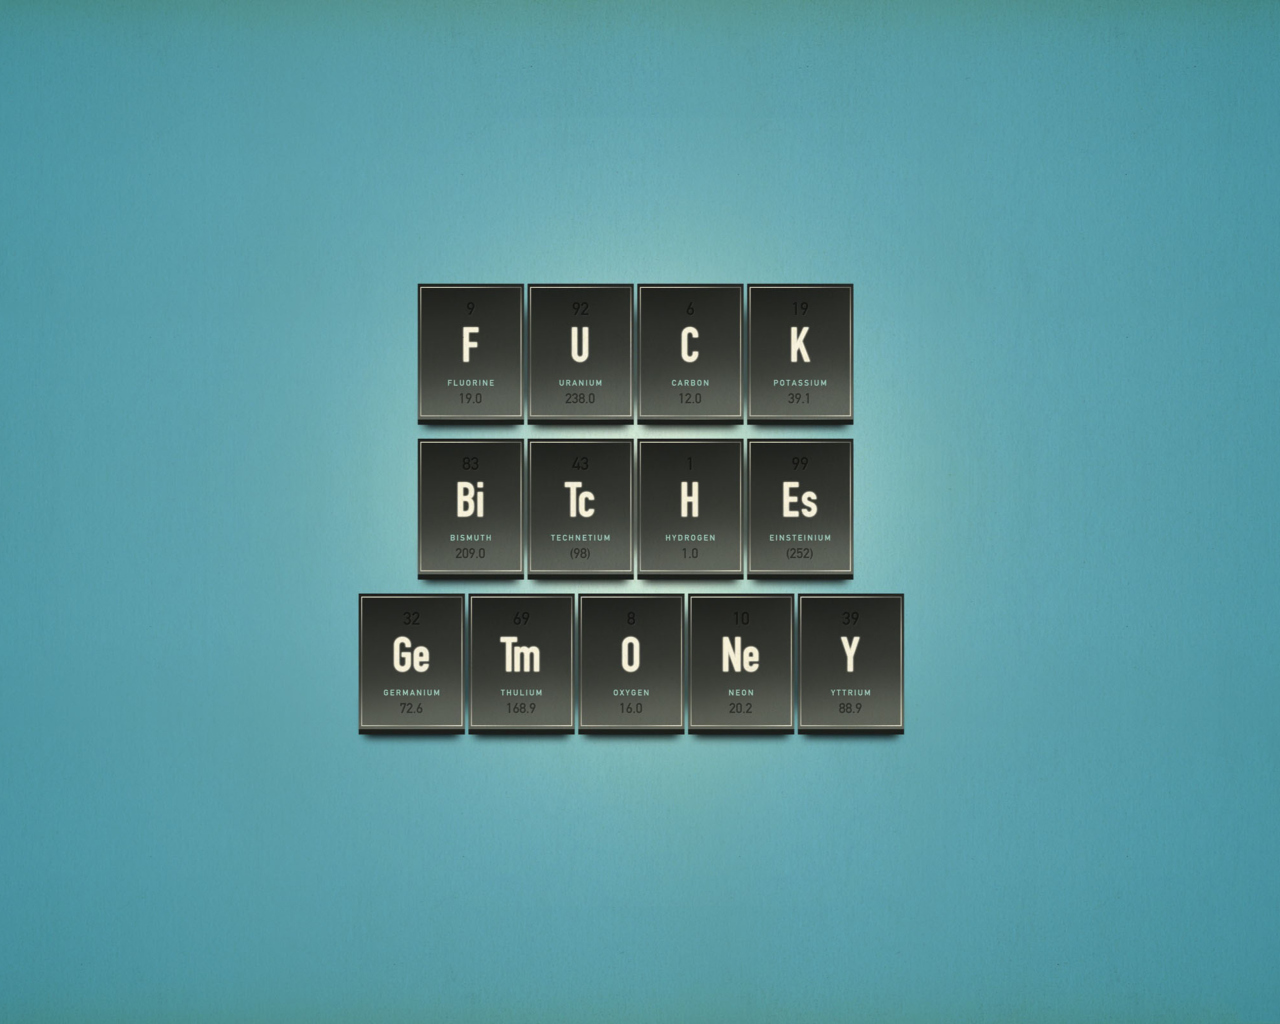 Funny Chemistry Periodic Table screenshot #1 1280x1024